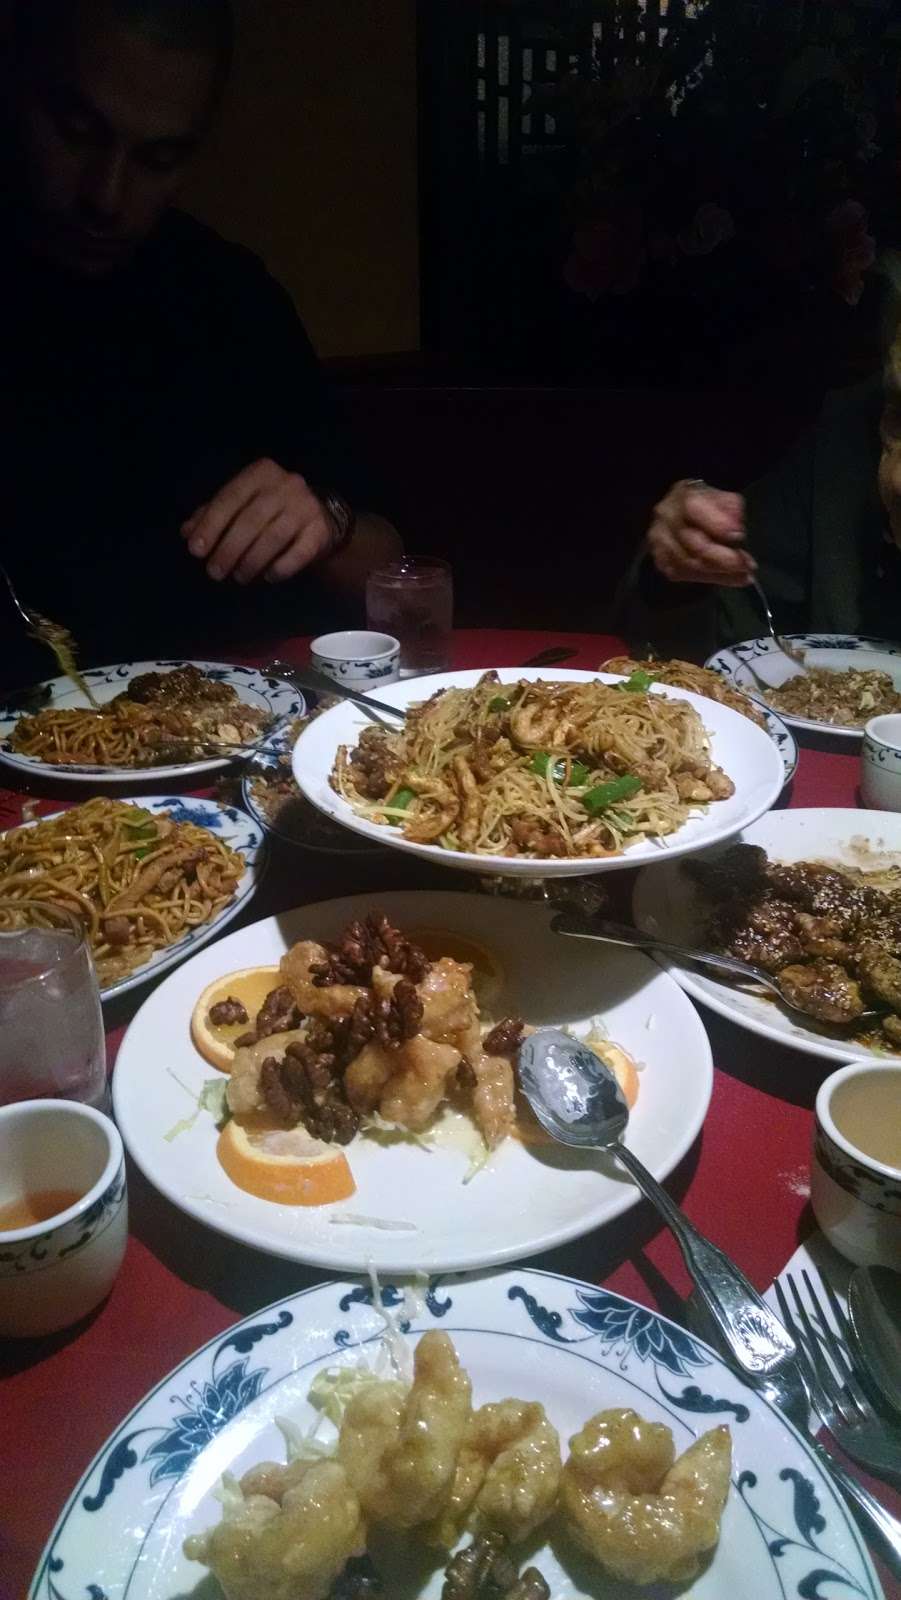 First Wok | 3123, 295 Princeton Hightstown Rd, West Windsor Township, NJ 08550 | Phone: (609) 716-8323